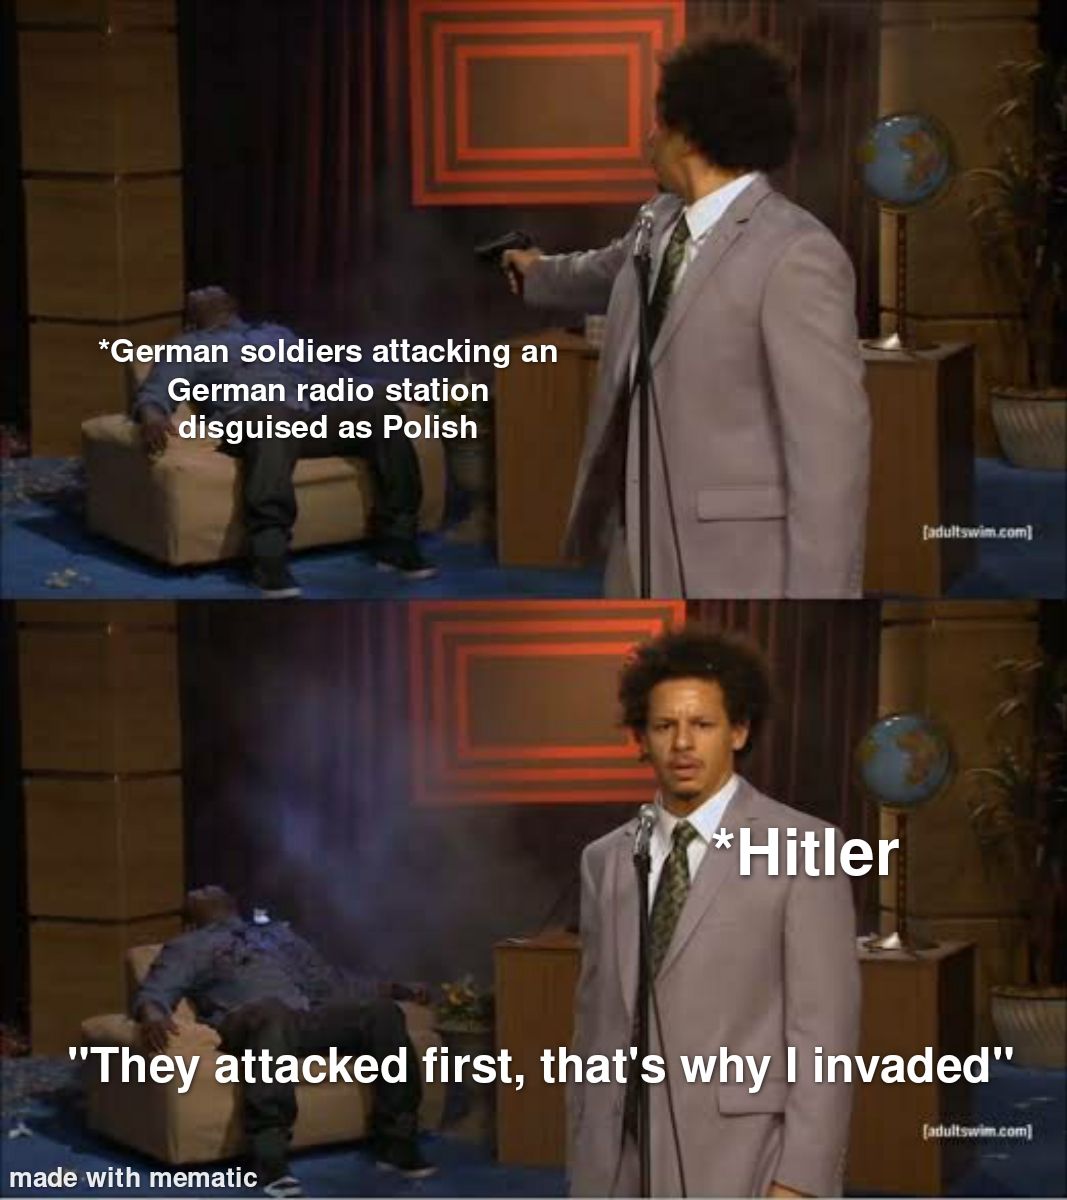 How Hitler justified invasion and this isn't weekend